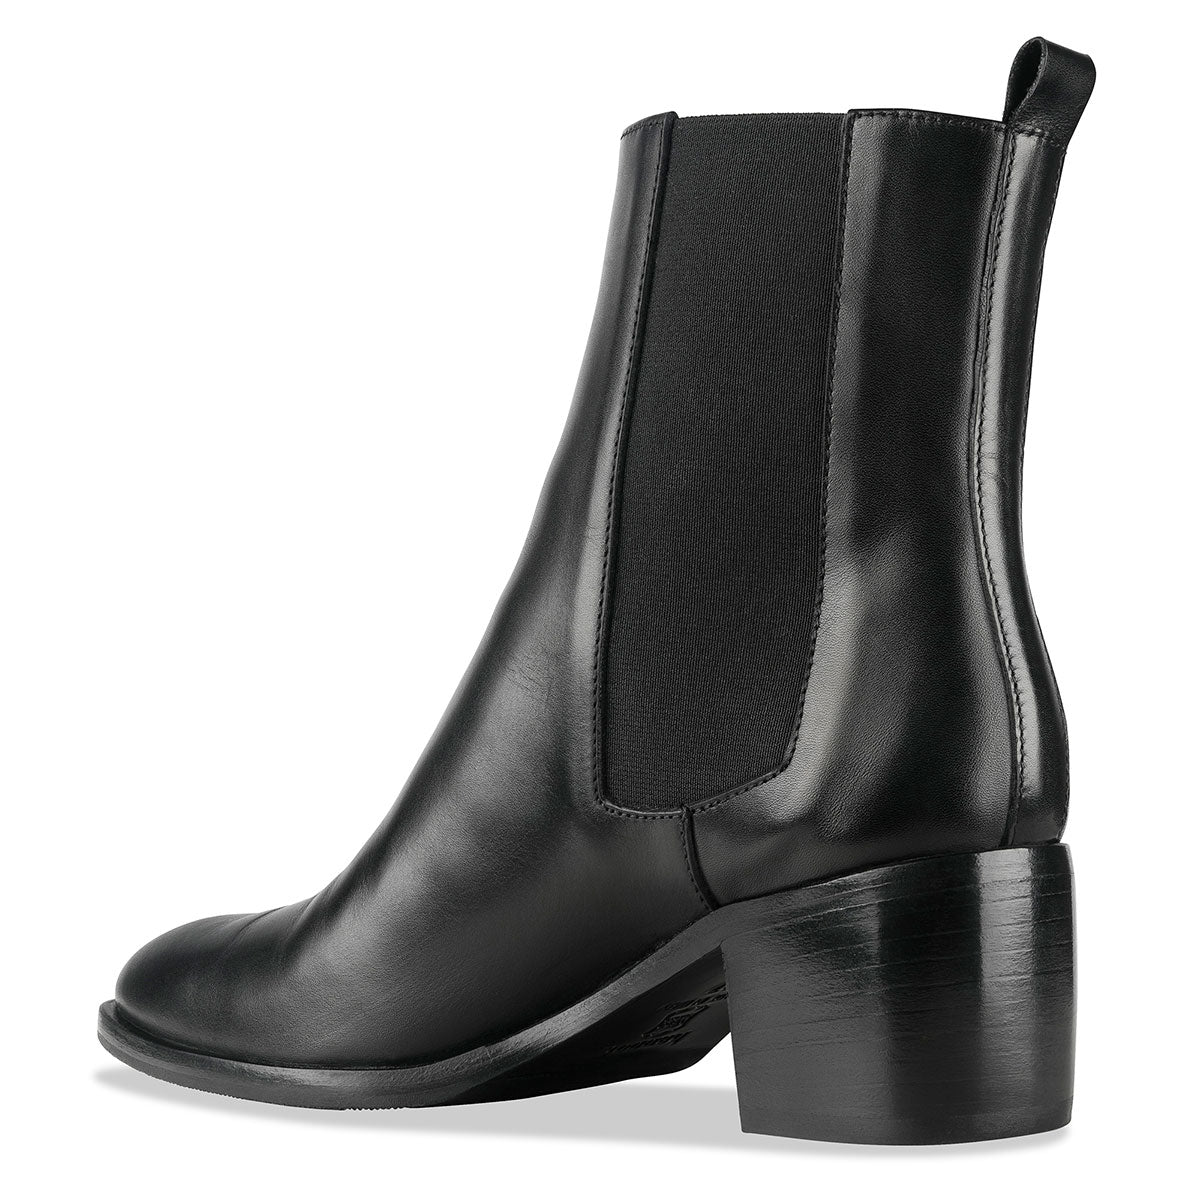 'Beans' Women's Black Leather Boots - Italian made Shoes | habbot